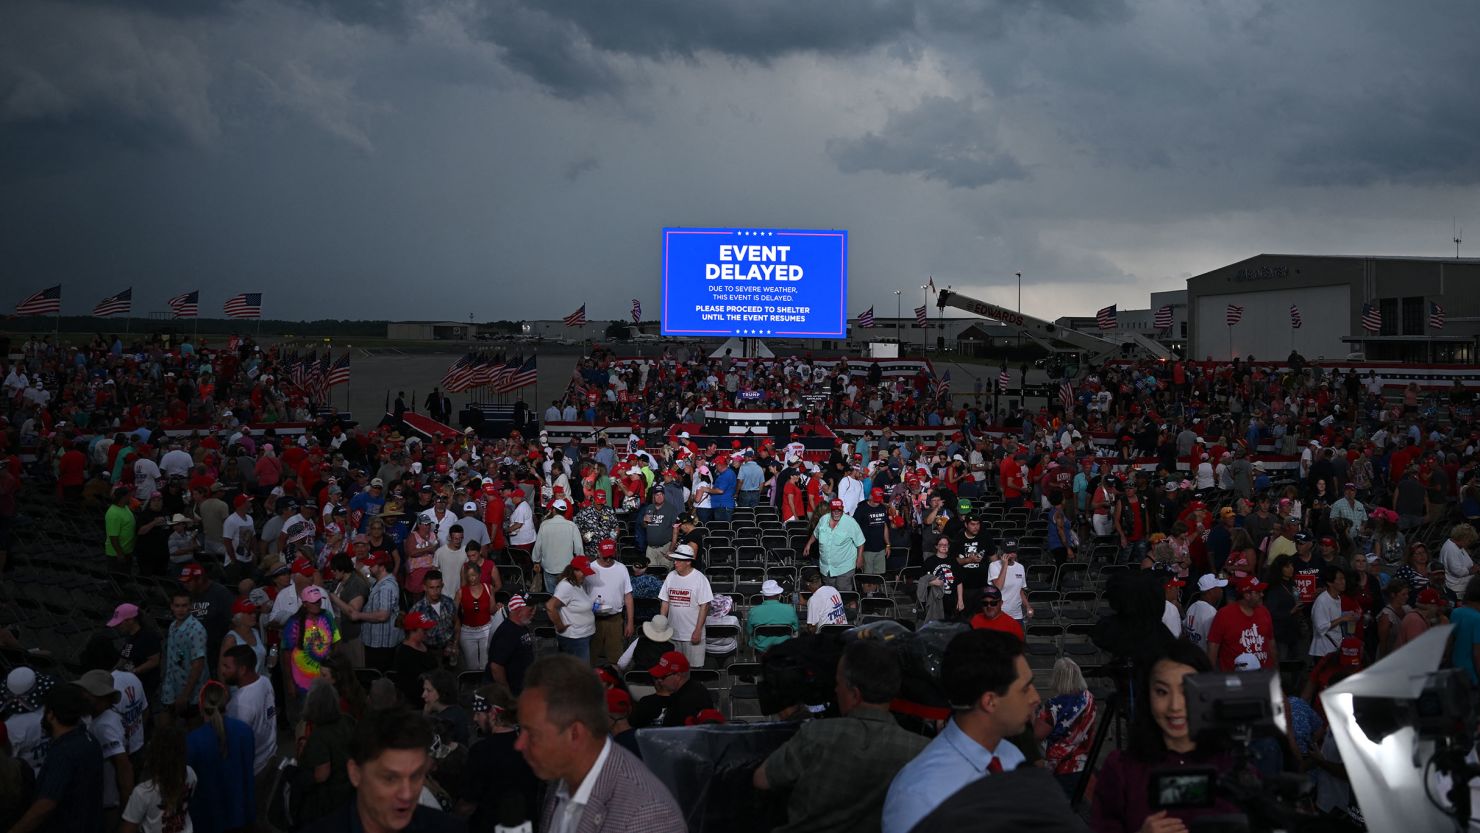 Supporters of former President Donald Trump are asked to move to shelter as a storm moves in before Trump was scheduled to speak at a campaign rally in Wilmington, North Carolina, on April 20, 2024.